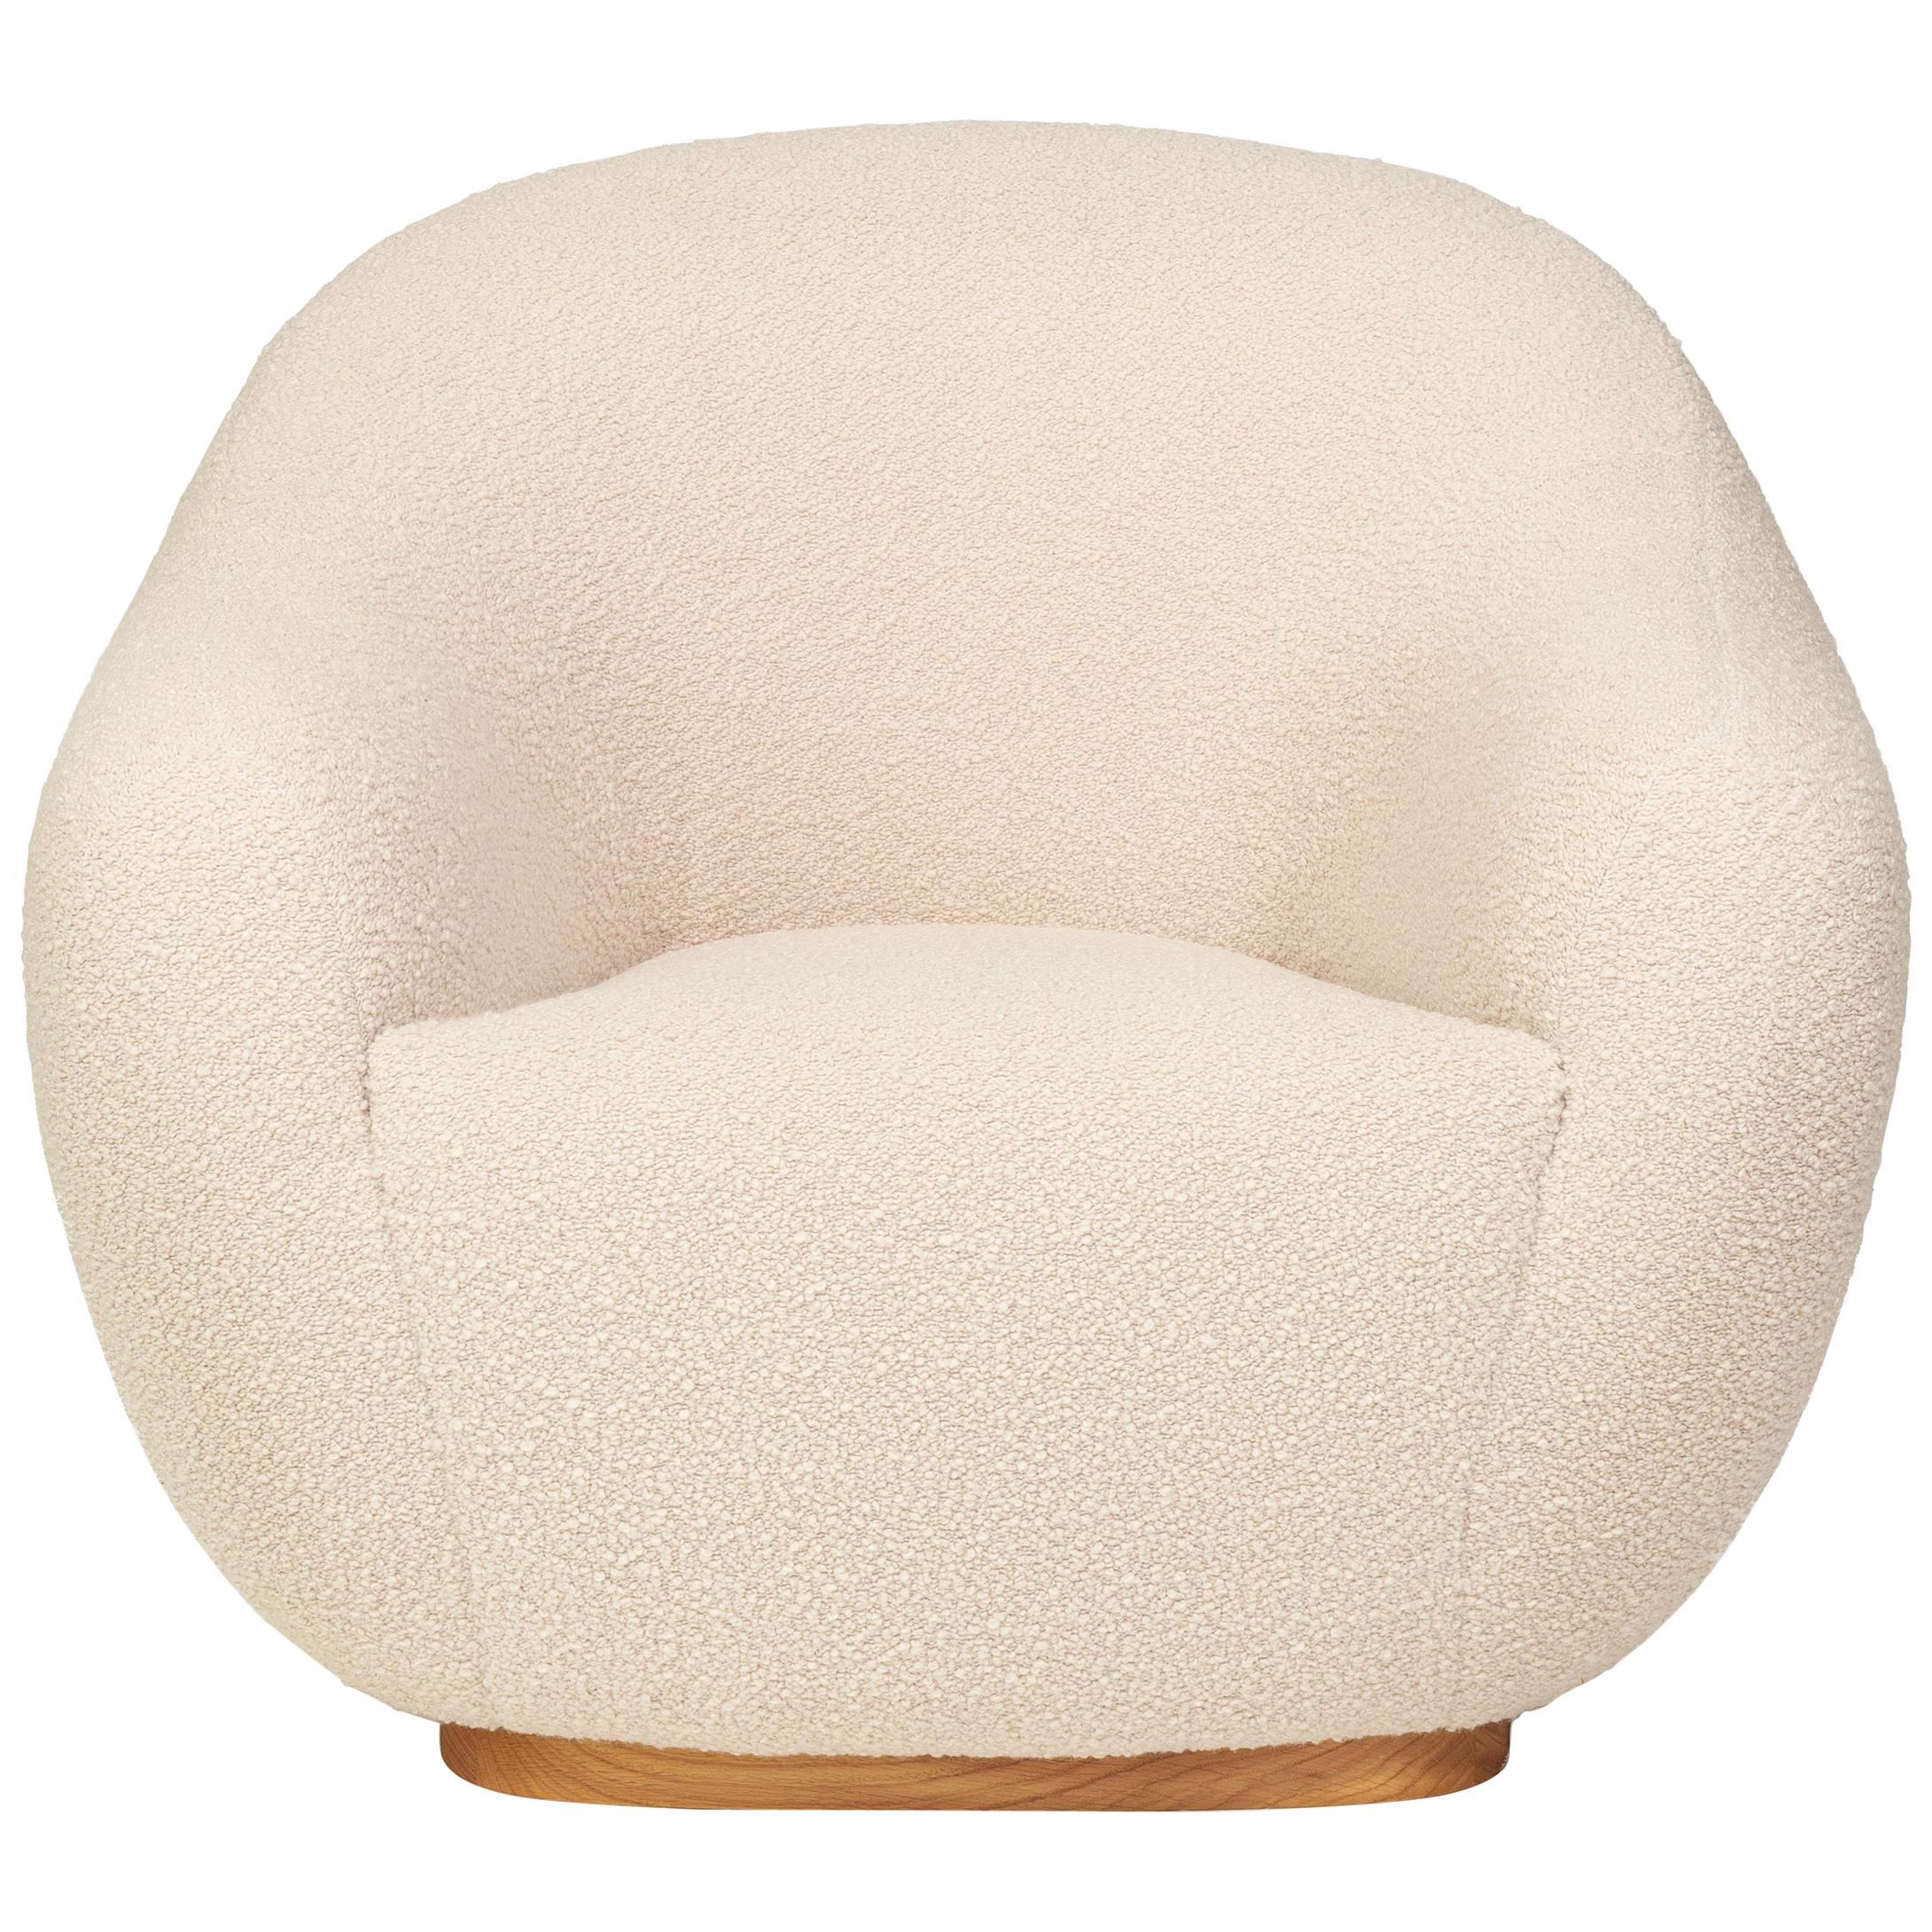 Gold Design Award Winner for Furniture Design Category at the A’Design Award Competition 2021-2022

The Niemeyer II bouclé armchair in this swivel version is named after the Brazilian Architect Oscar Niemeyer whose Architecture was spread like